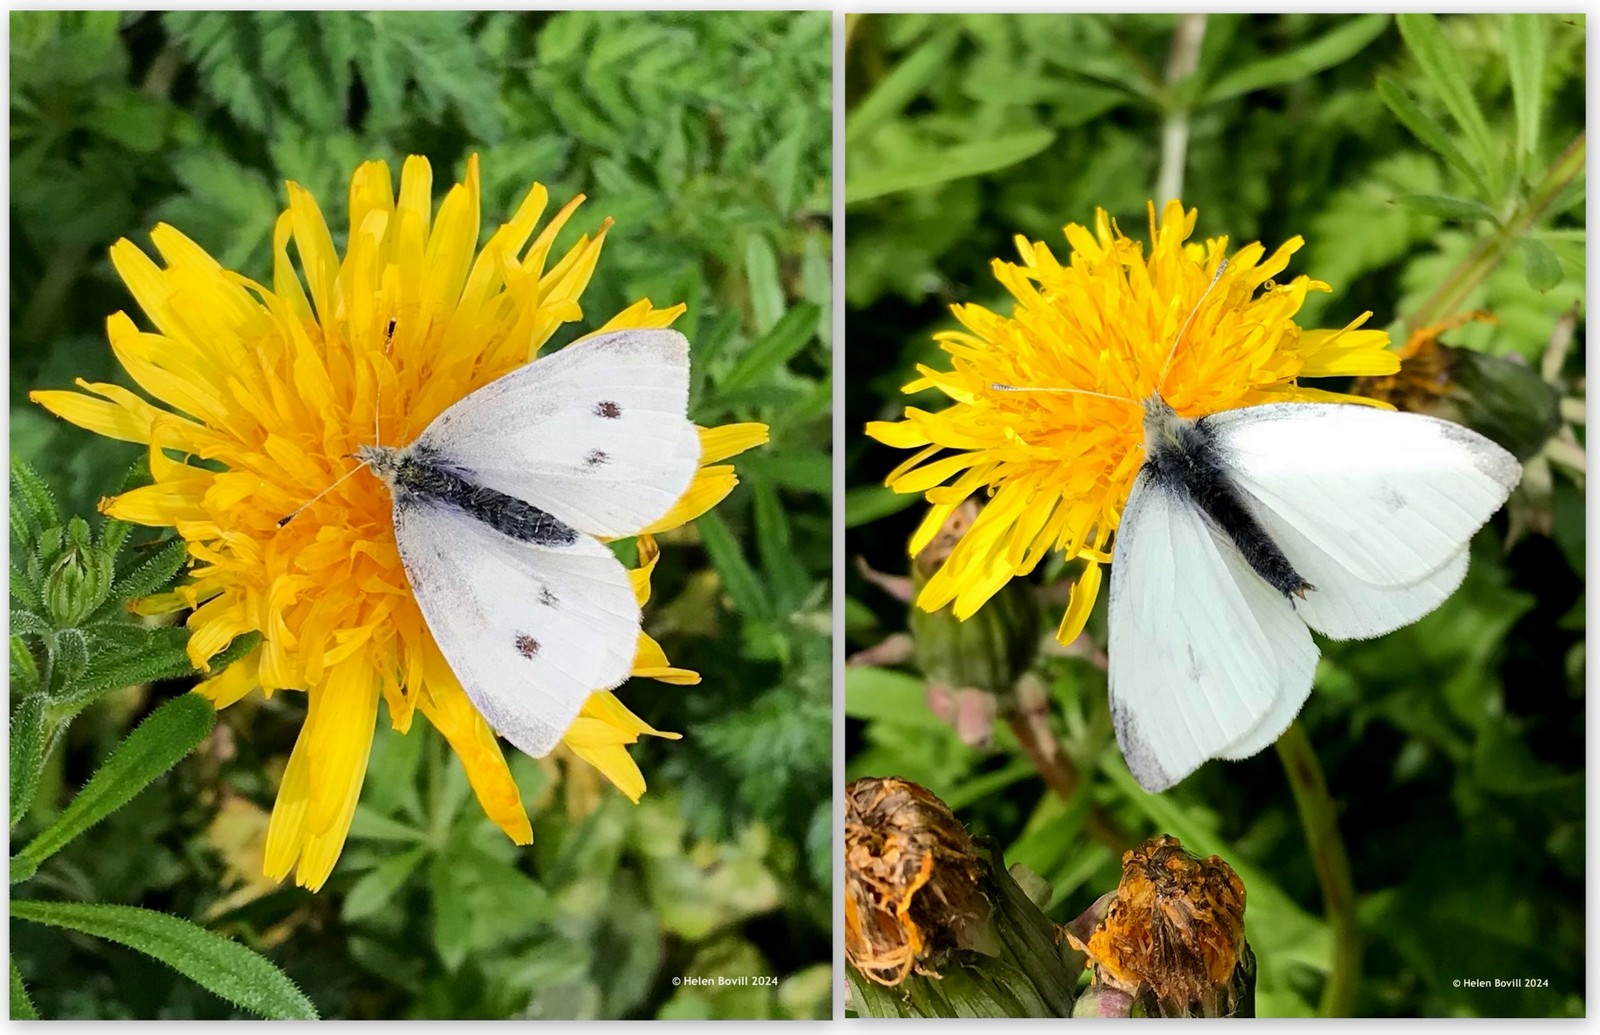 Two photos of Small White butterflies on dandelions in the cemetery